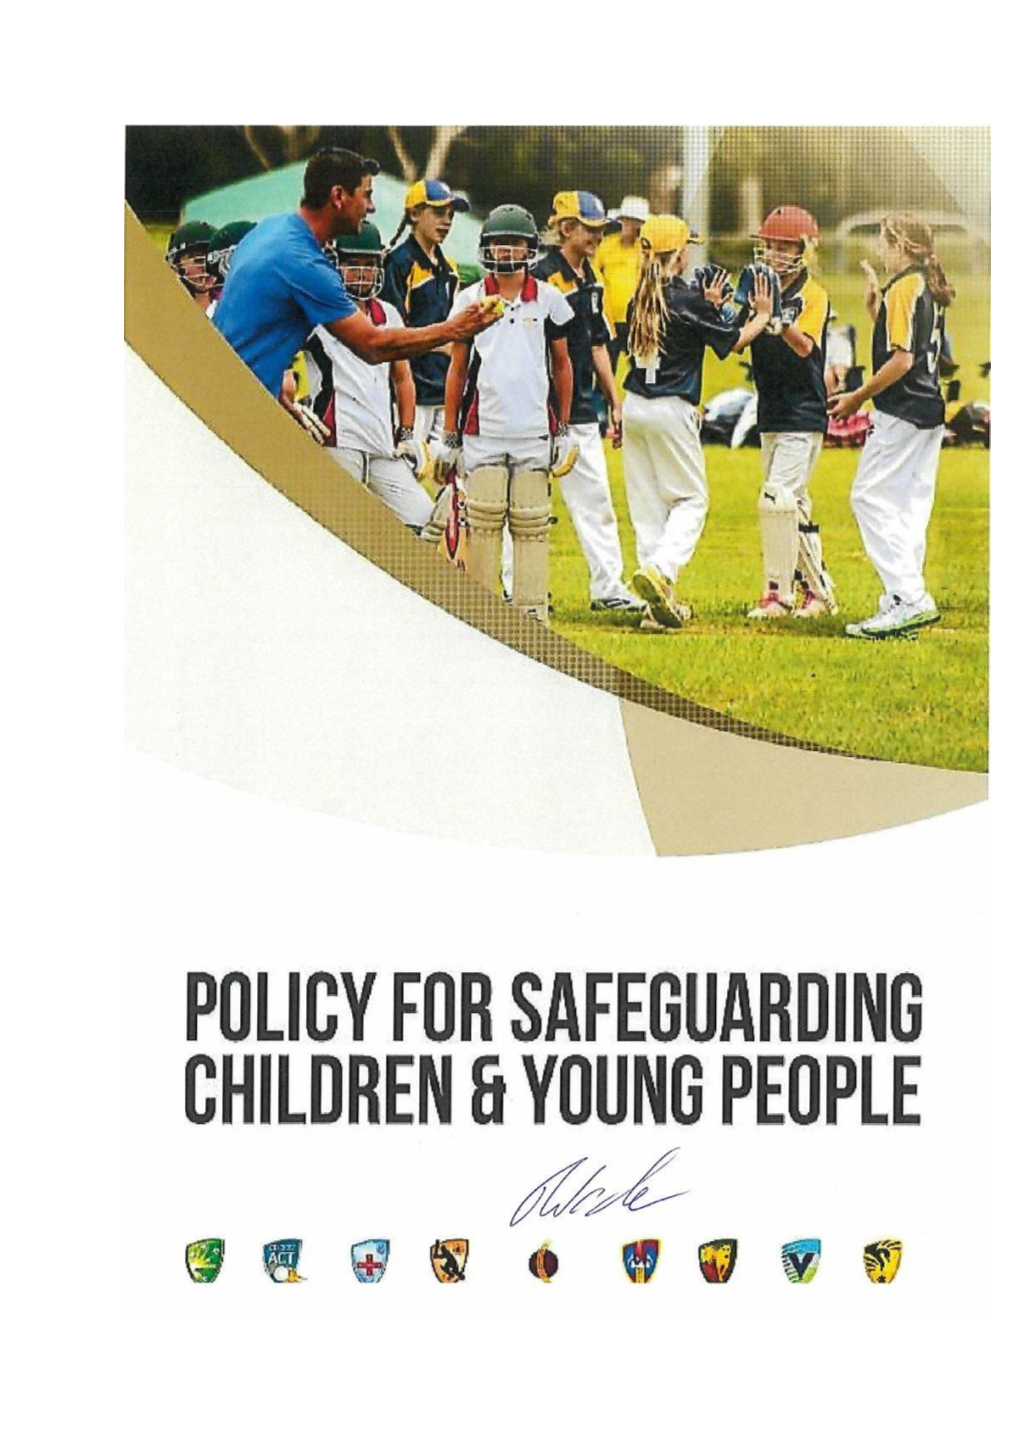 Australian Cricket's Policy for Safeguarding